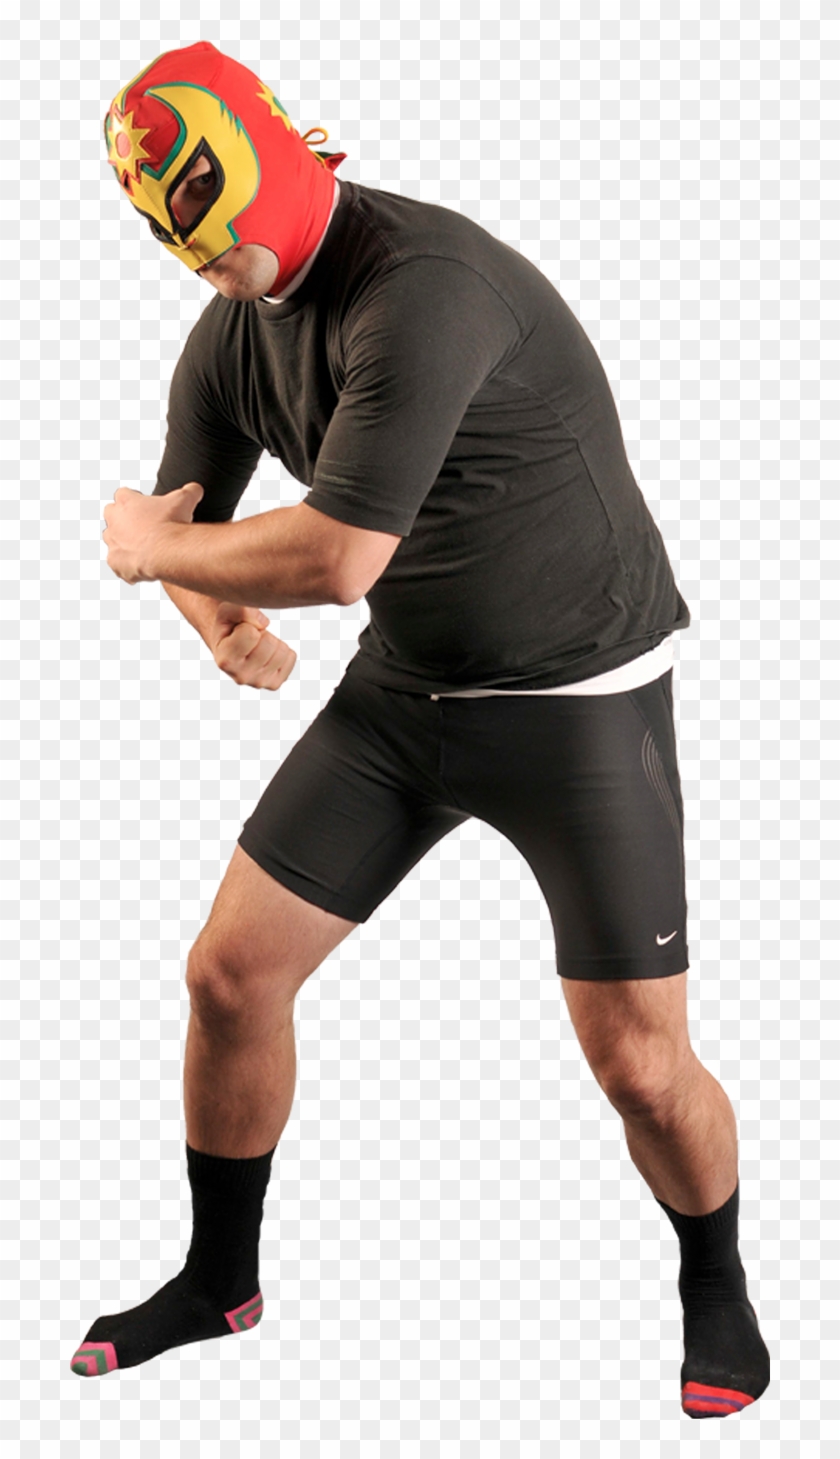 Wrestlerclipping - Mexican Wrestler Png Transparent Png #367991